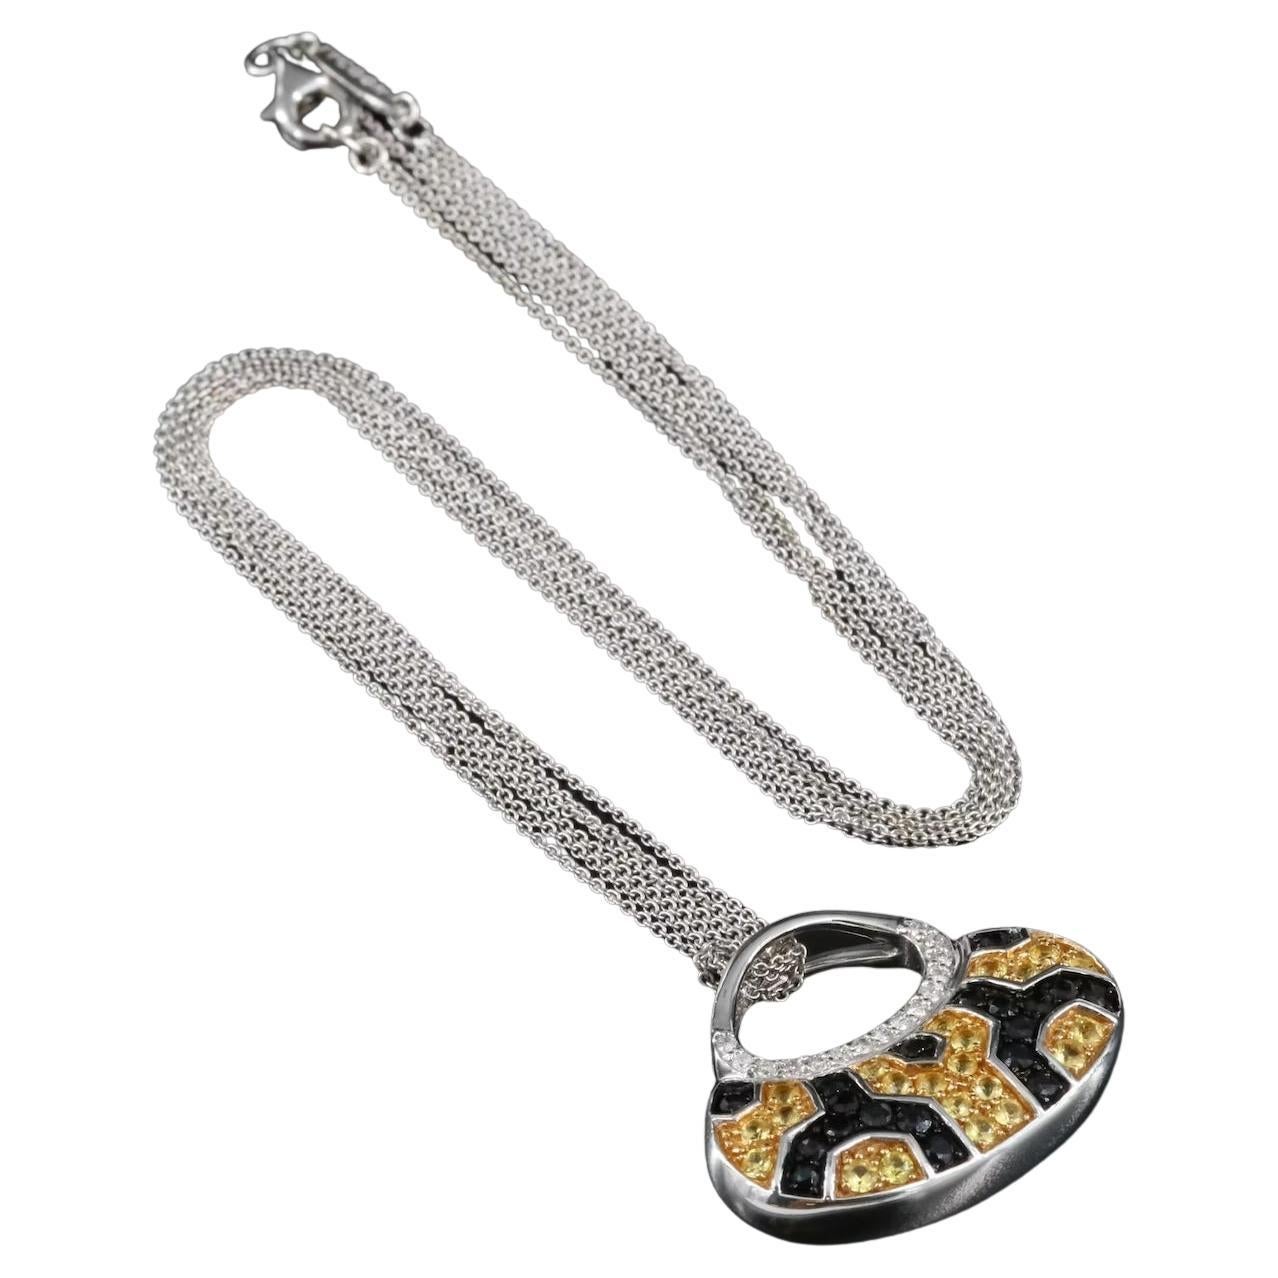 Designer Mirabelle Massive Pendant with Heavy 3 stand Tycoon chain 

NEW with tags, Tag Price $8750

18K White Gold (both pendant and chain)

Diamond and Sapphire, all natural and high quality 
        
Very Heavy, 15.1 grams 

Chain is 16.75